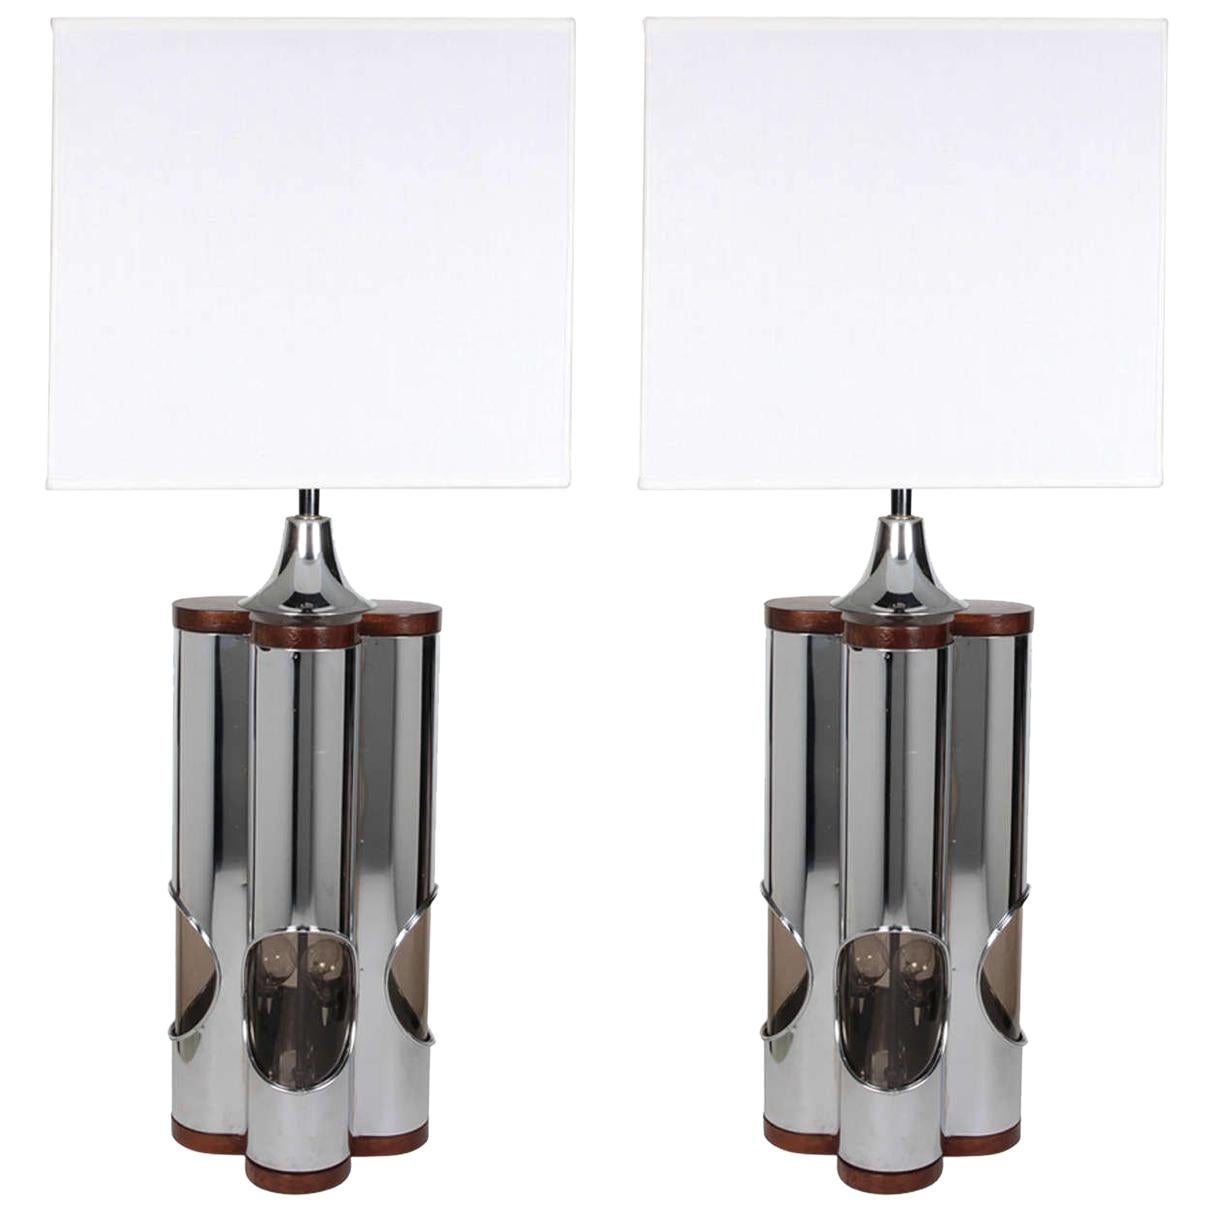 Pair of Sculptural Mid-Century Modern Chrome Lamps by Laurel, c. 1960's